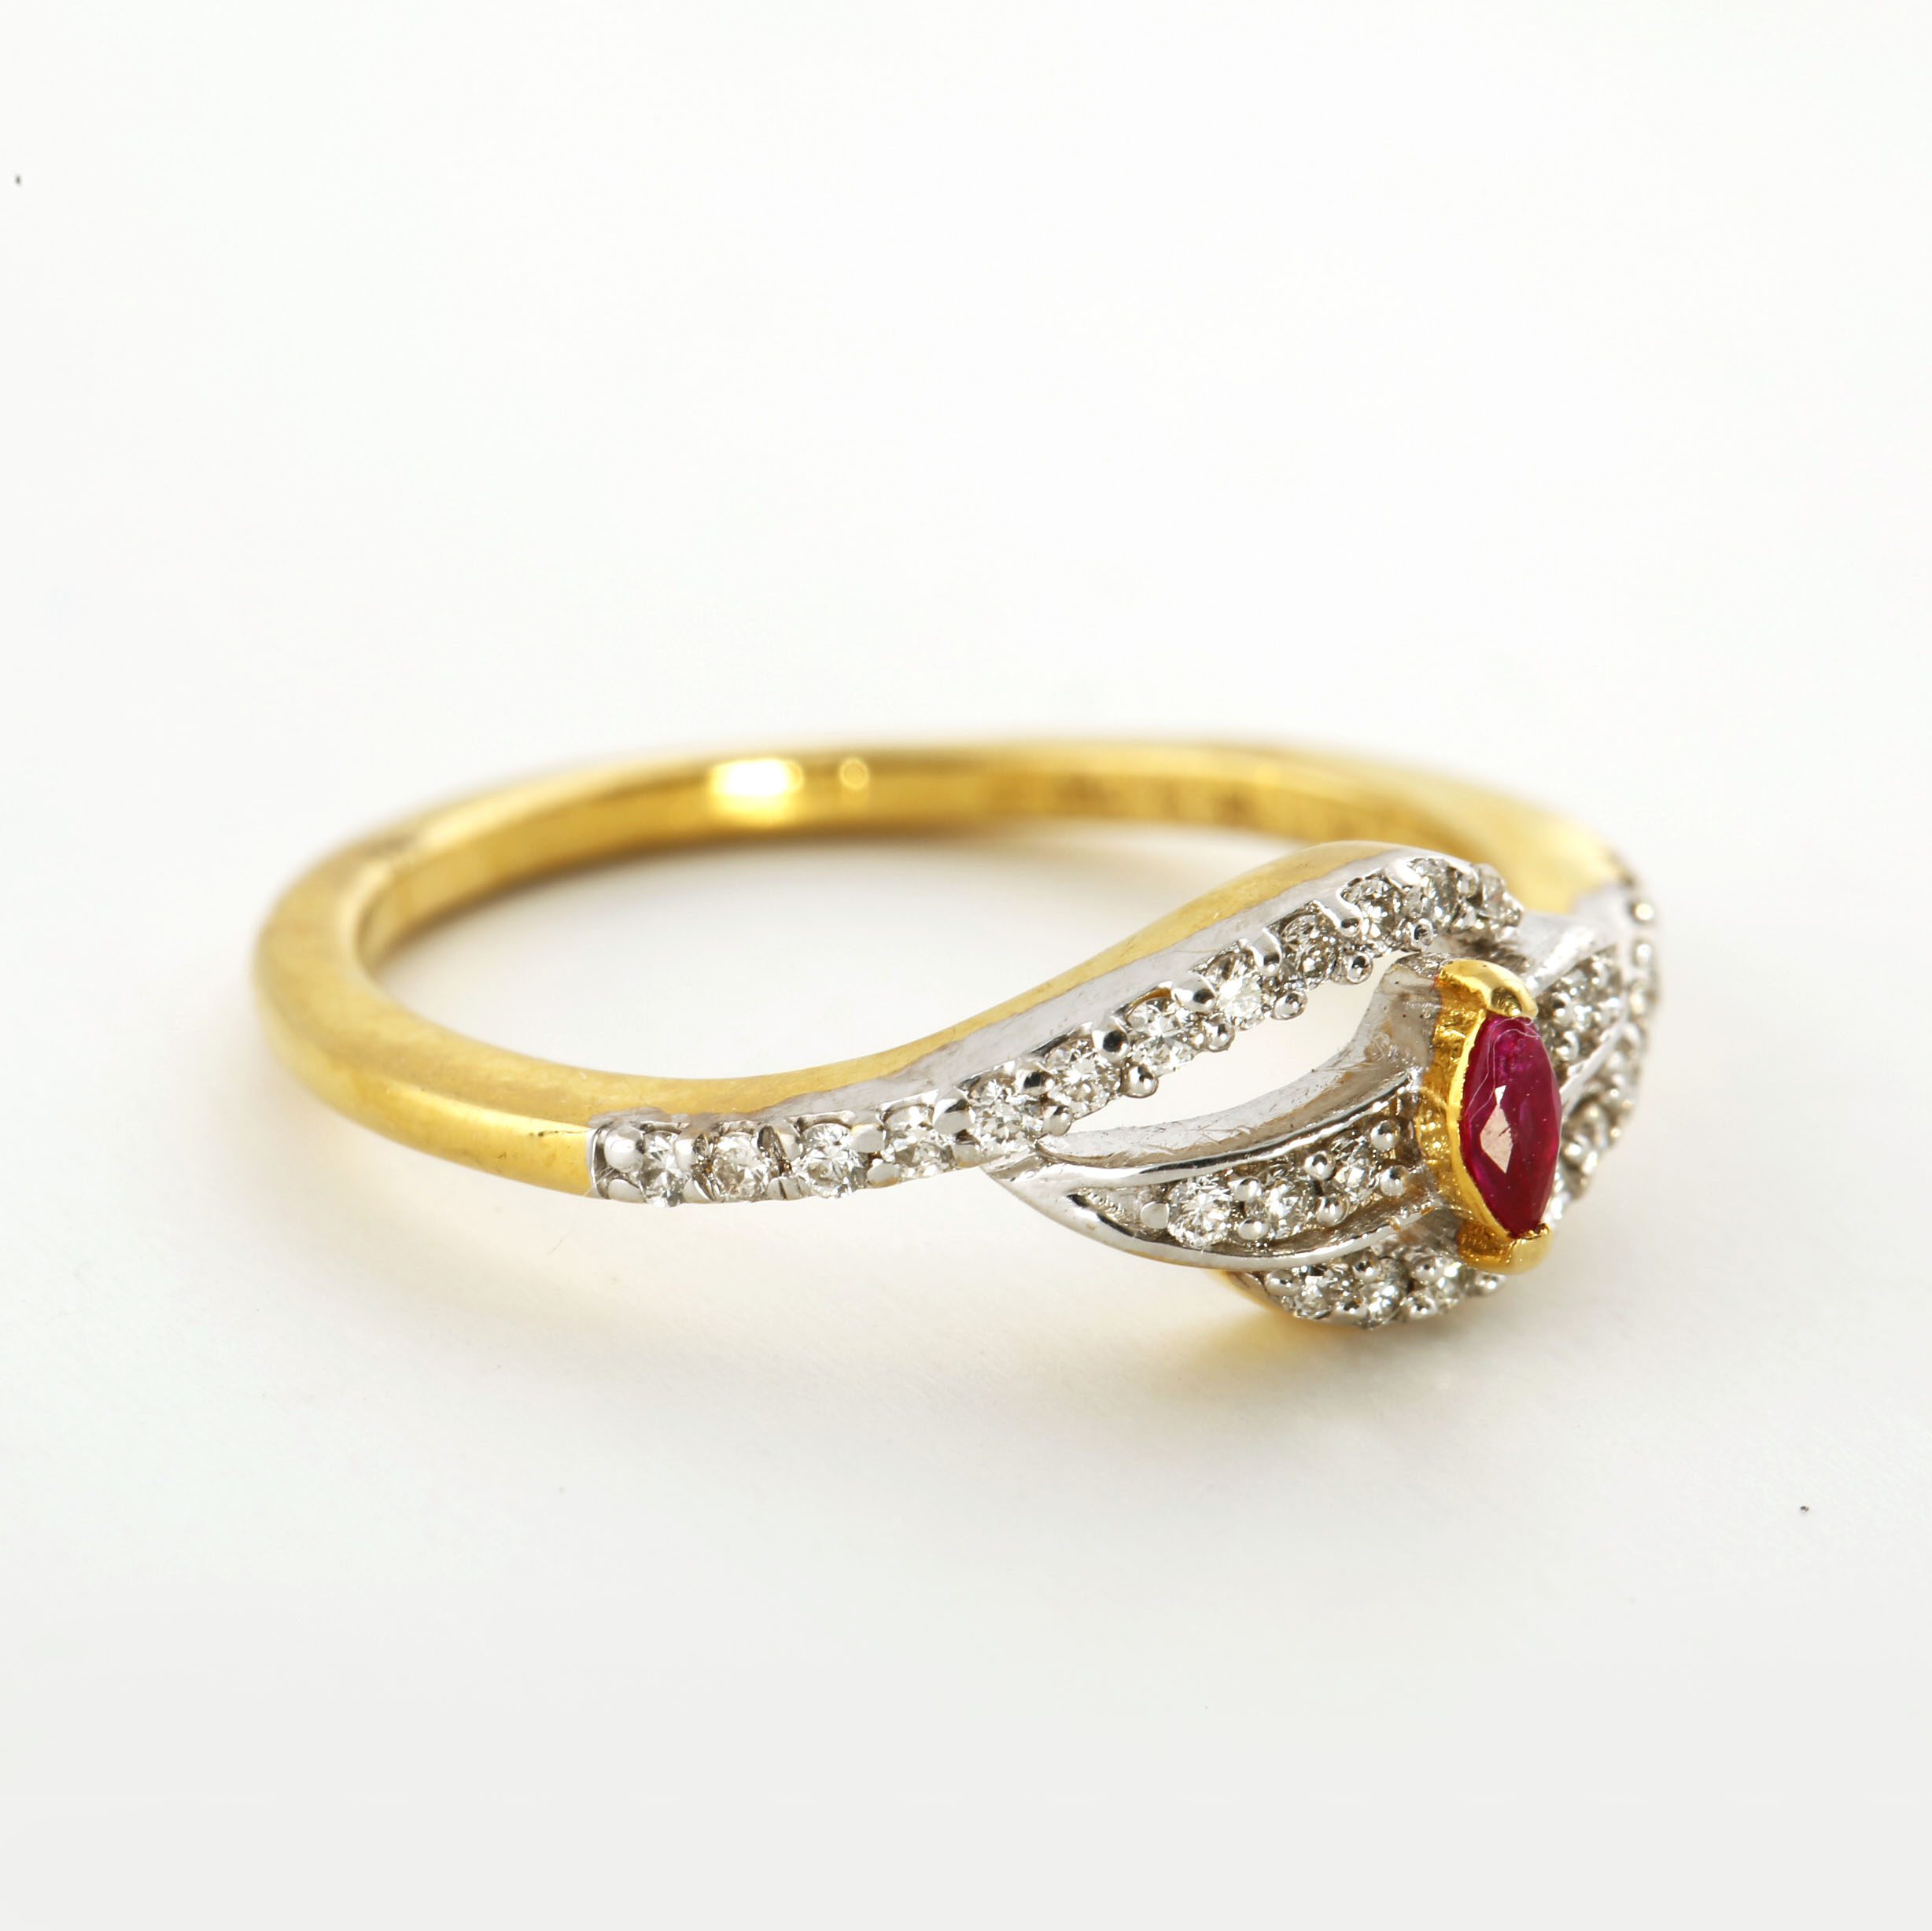 2.00ct Burma Pigeon Blood Ruby and Marquise Diamond Ring | Vintage engagement  rings, Gold rings fashion, Gold ring designs